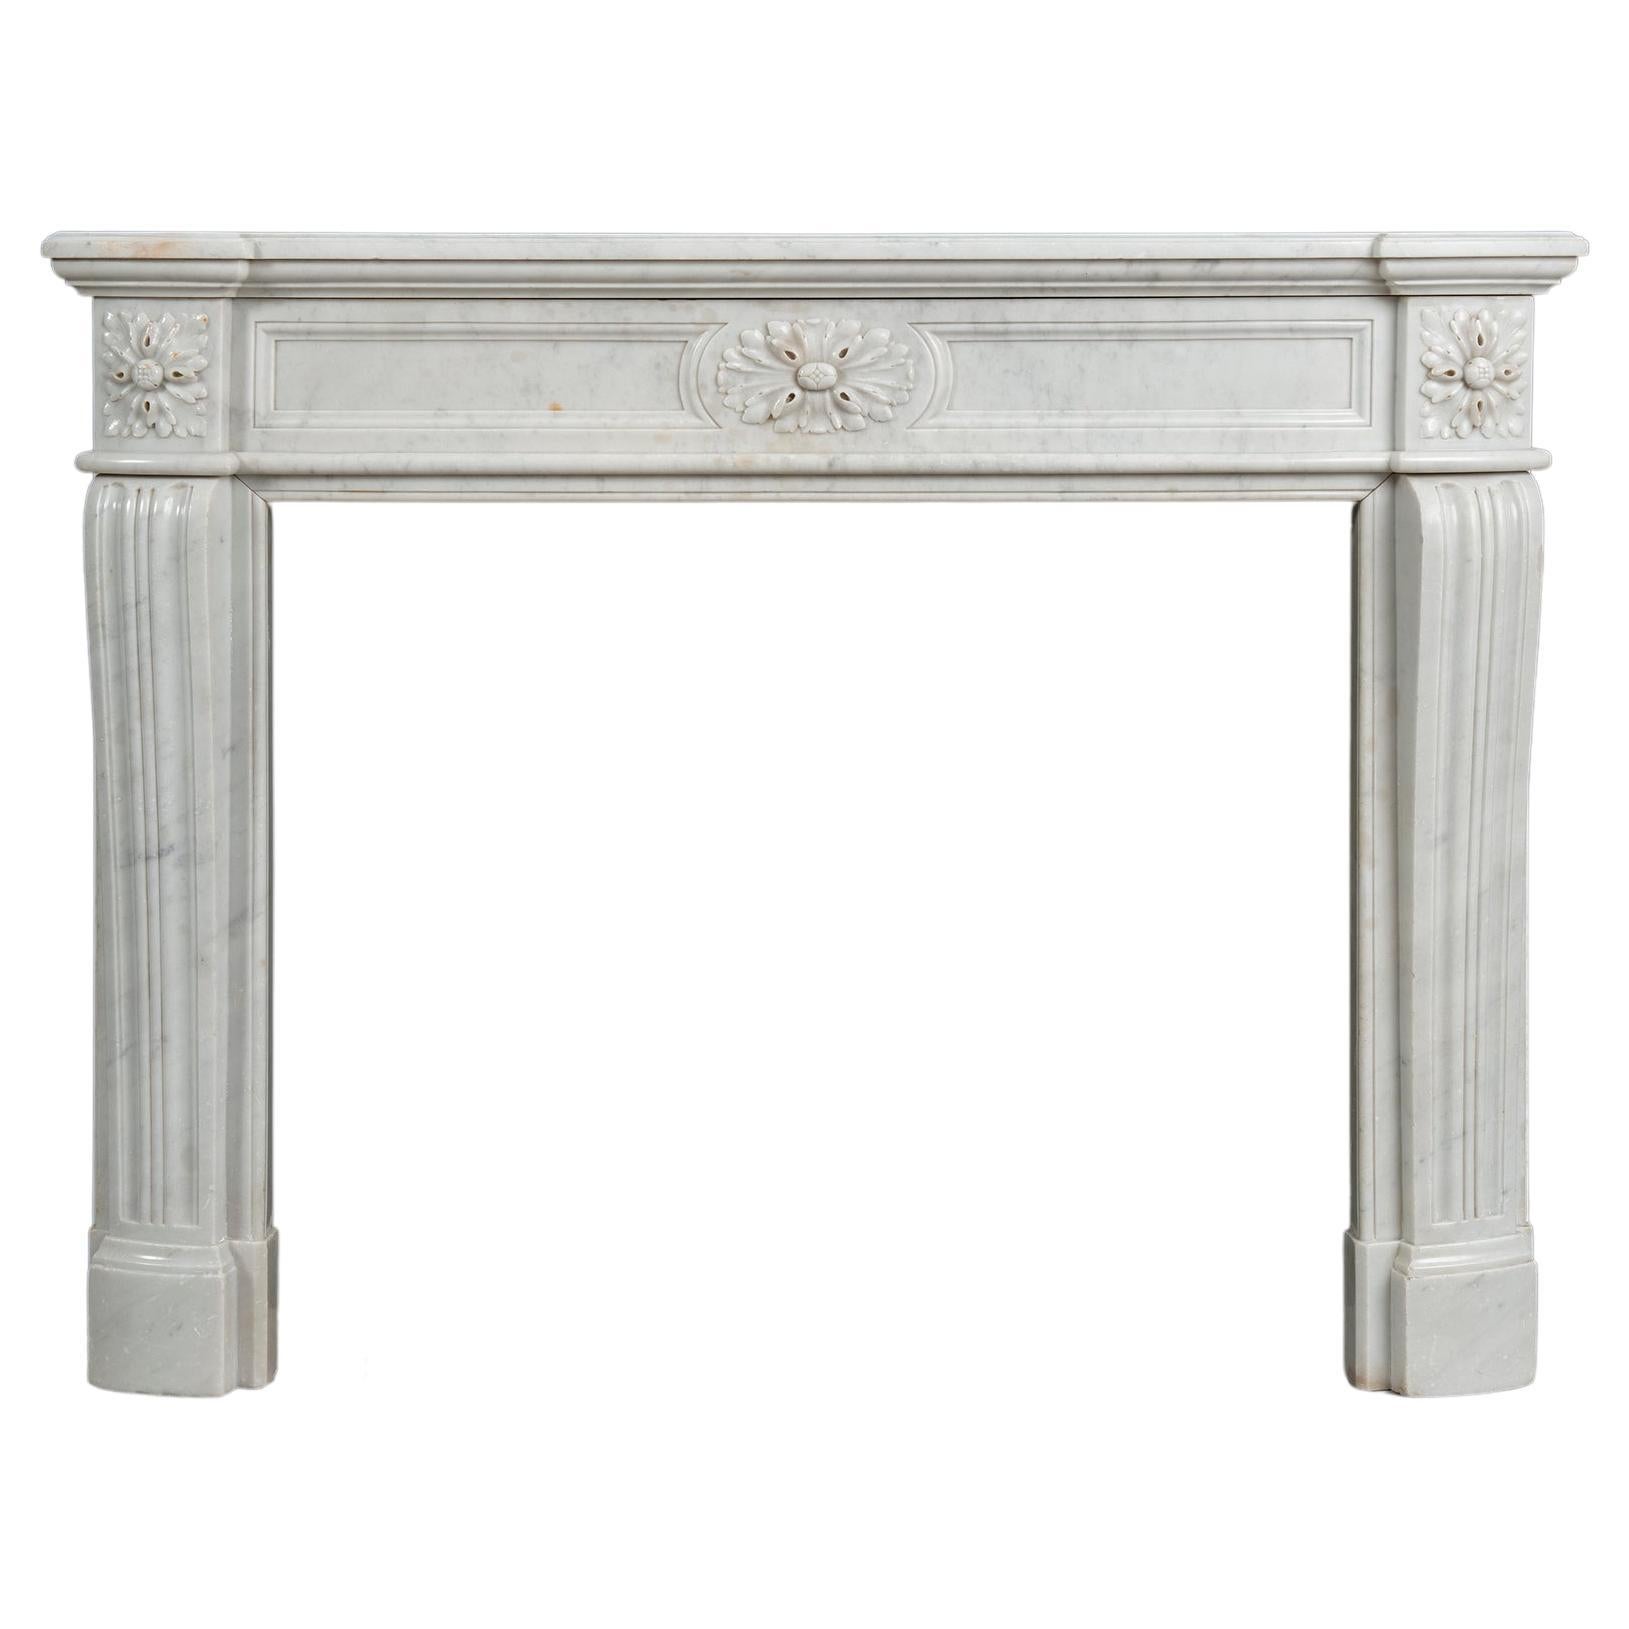 Perfect Petite Antique Fireplace Mantel in White Marble For Sale